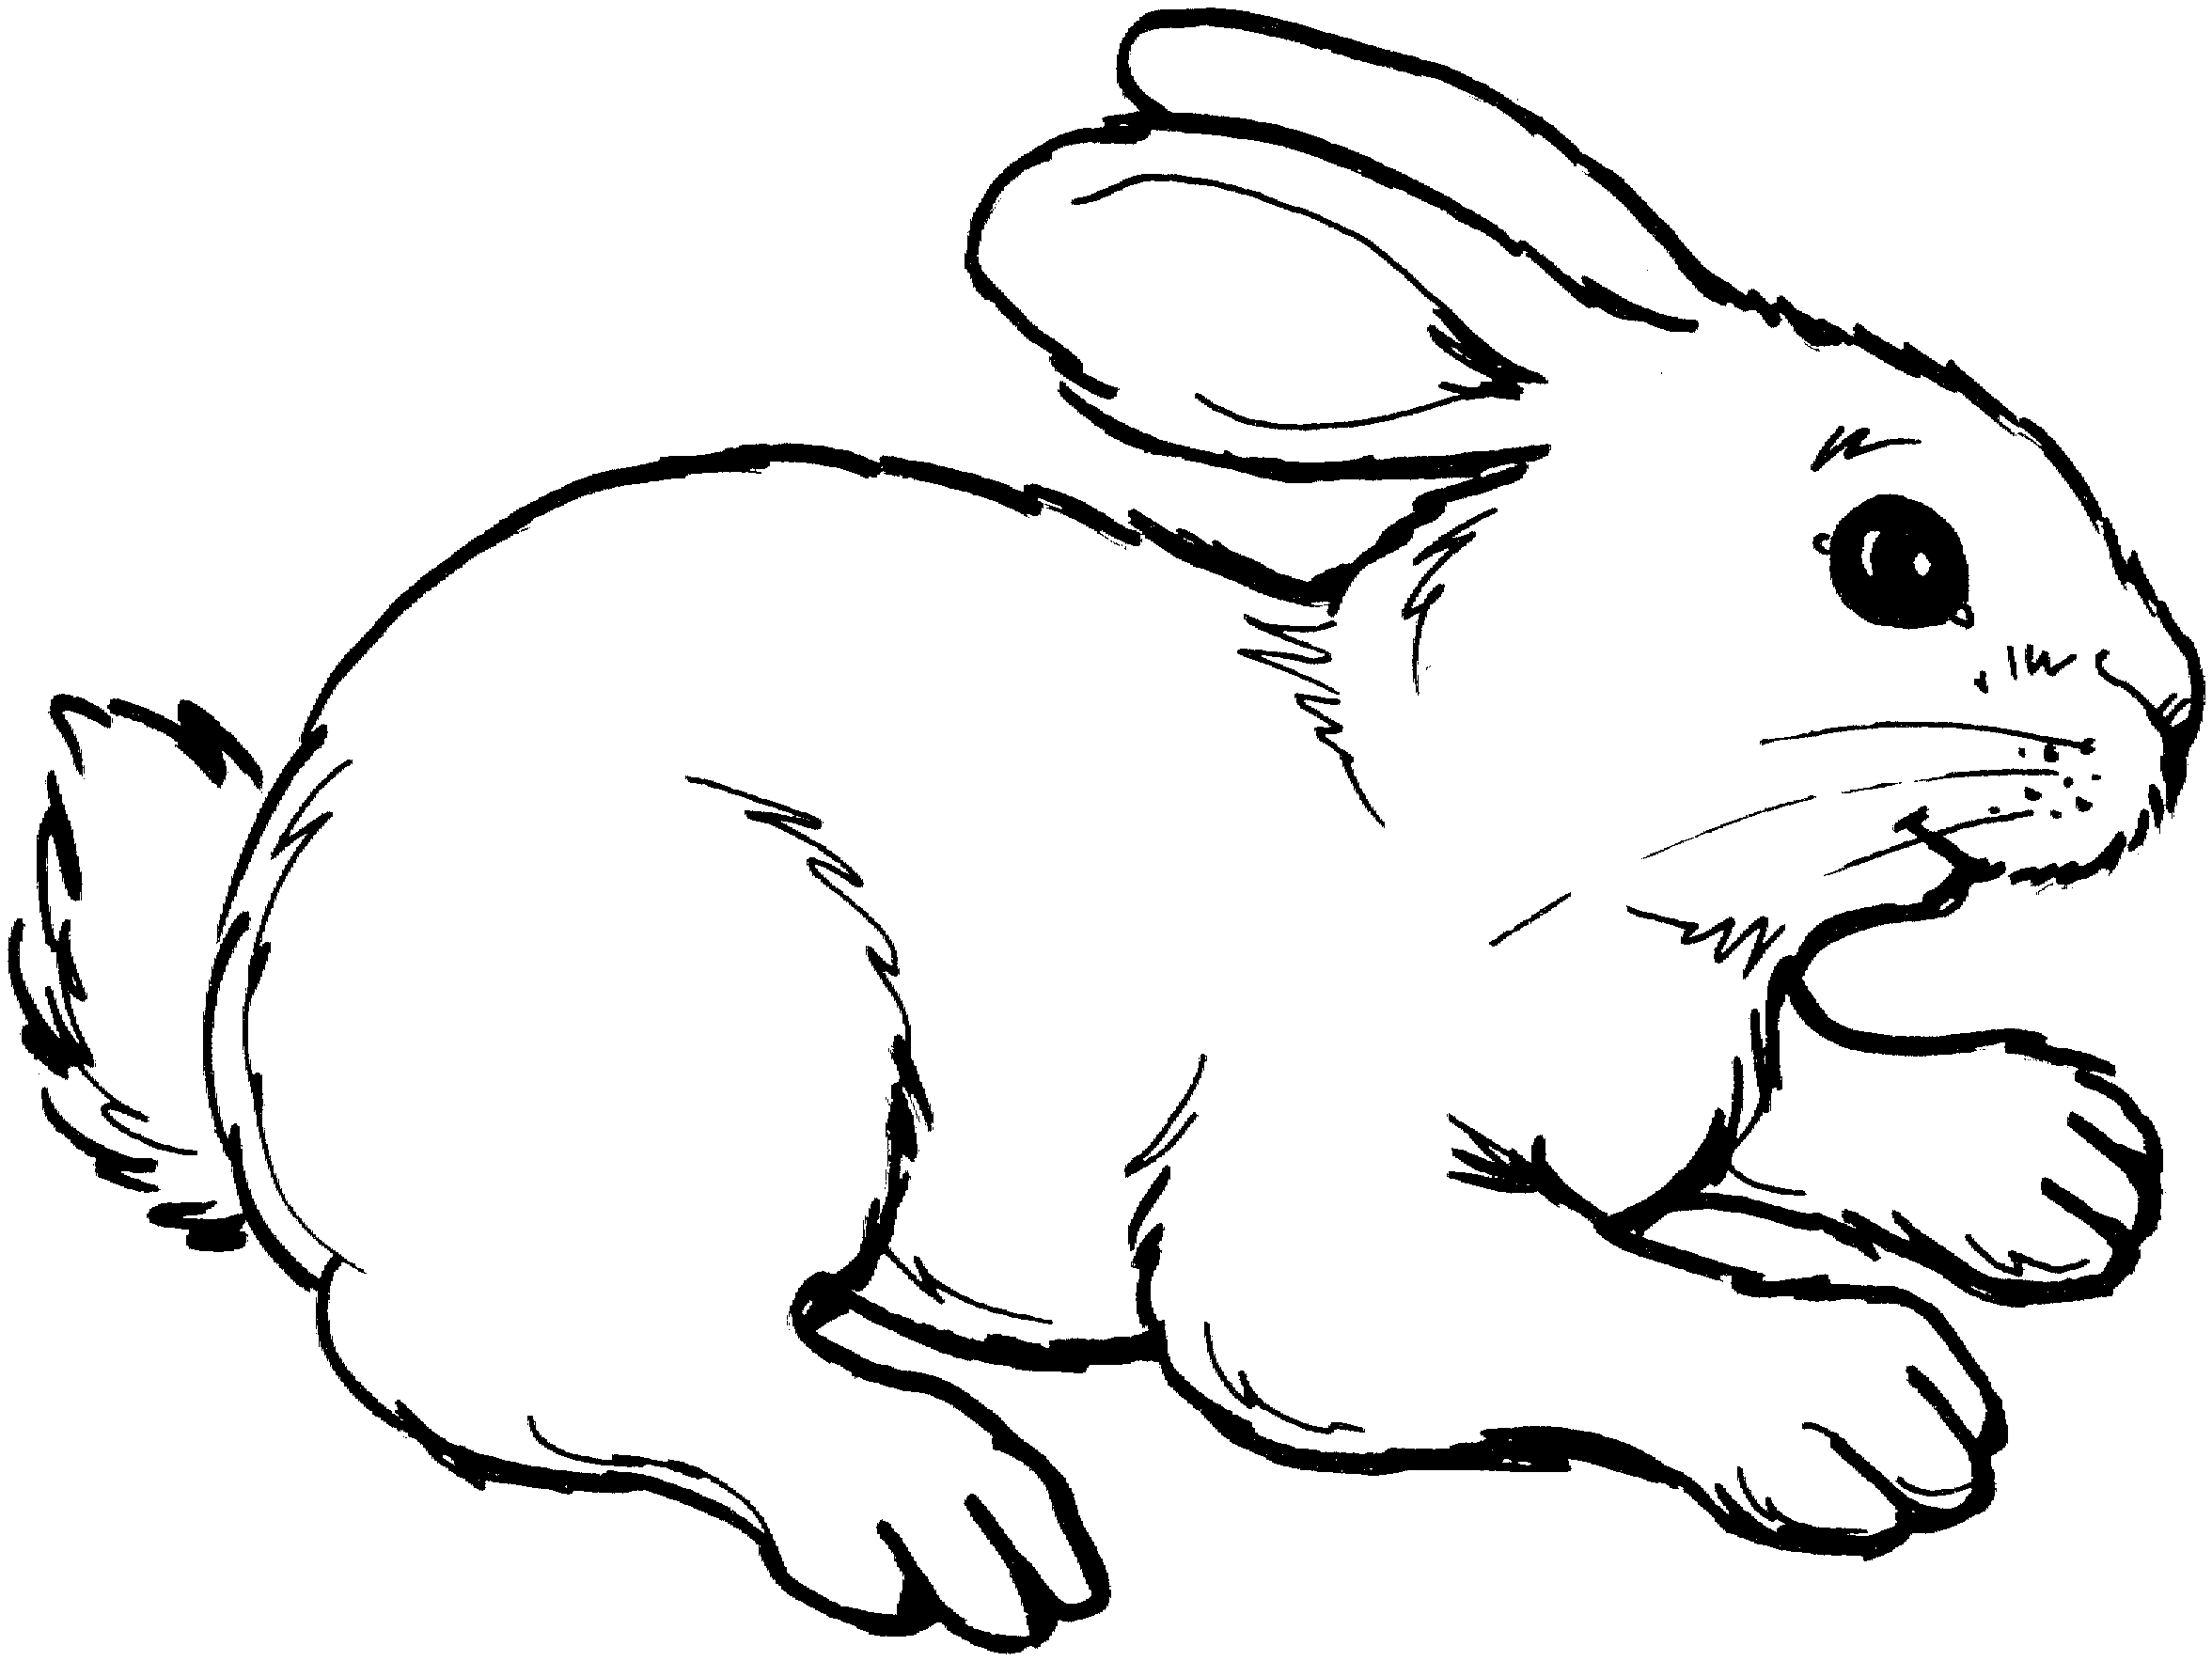 Bunny black and white rabbit black and white clipart